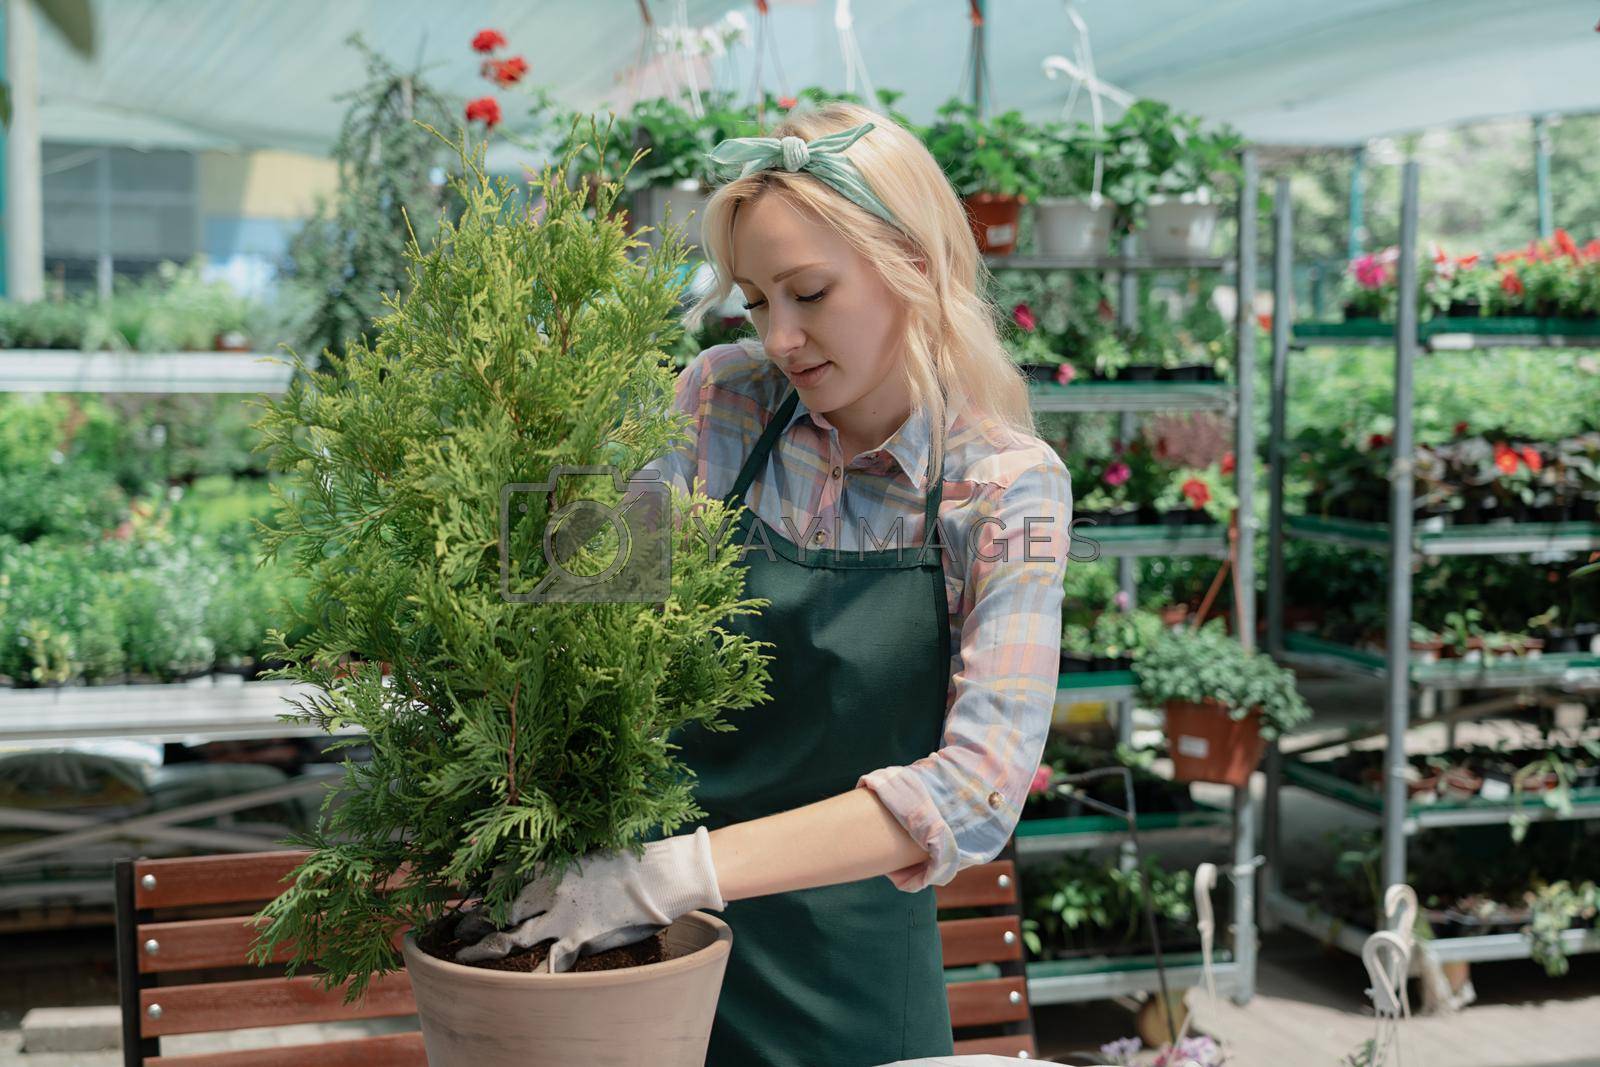 Royalty free image of Woman planting a bush in flower pot using dirt in garden center by Mariakray